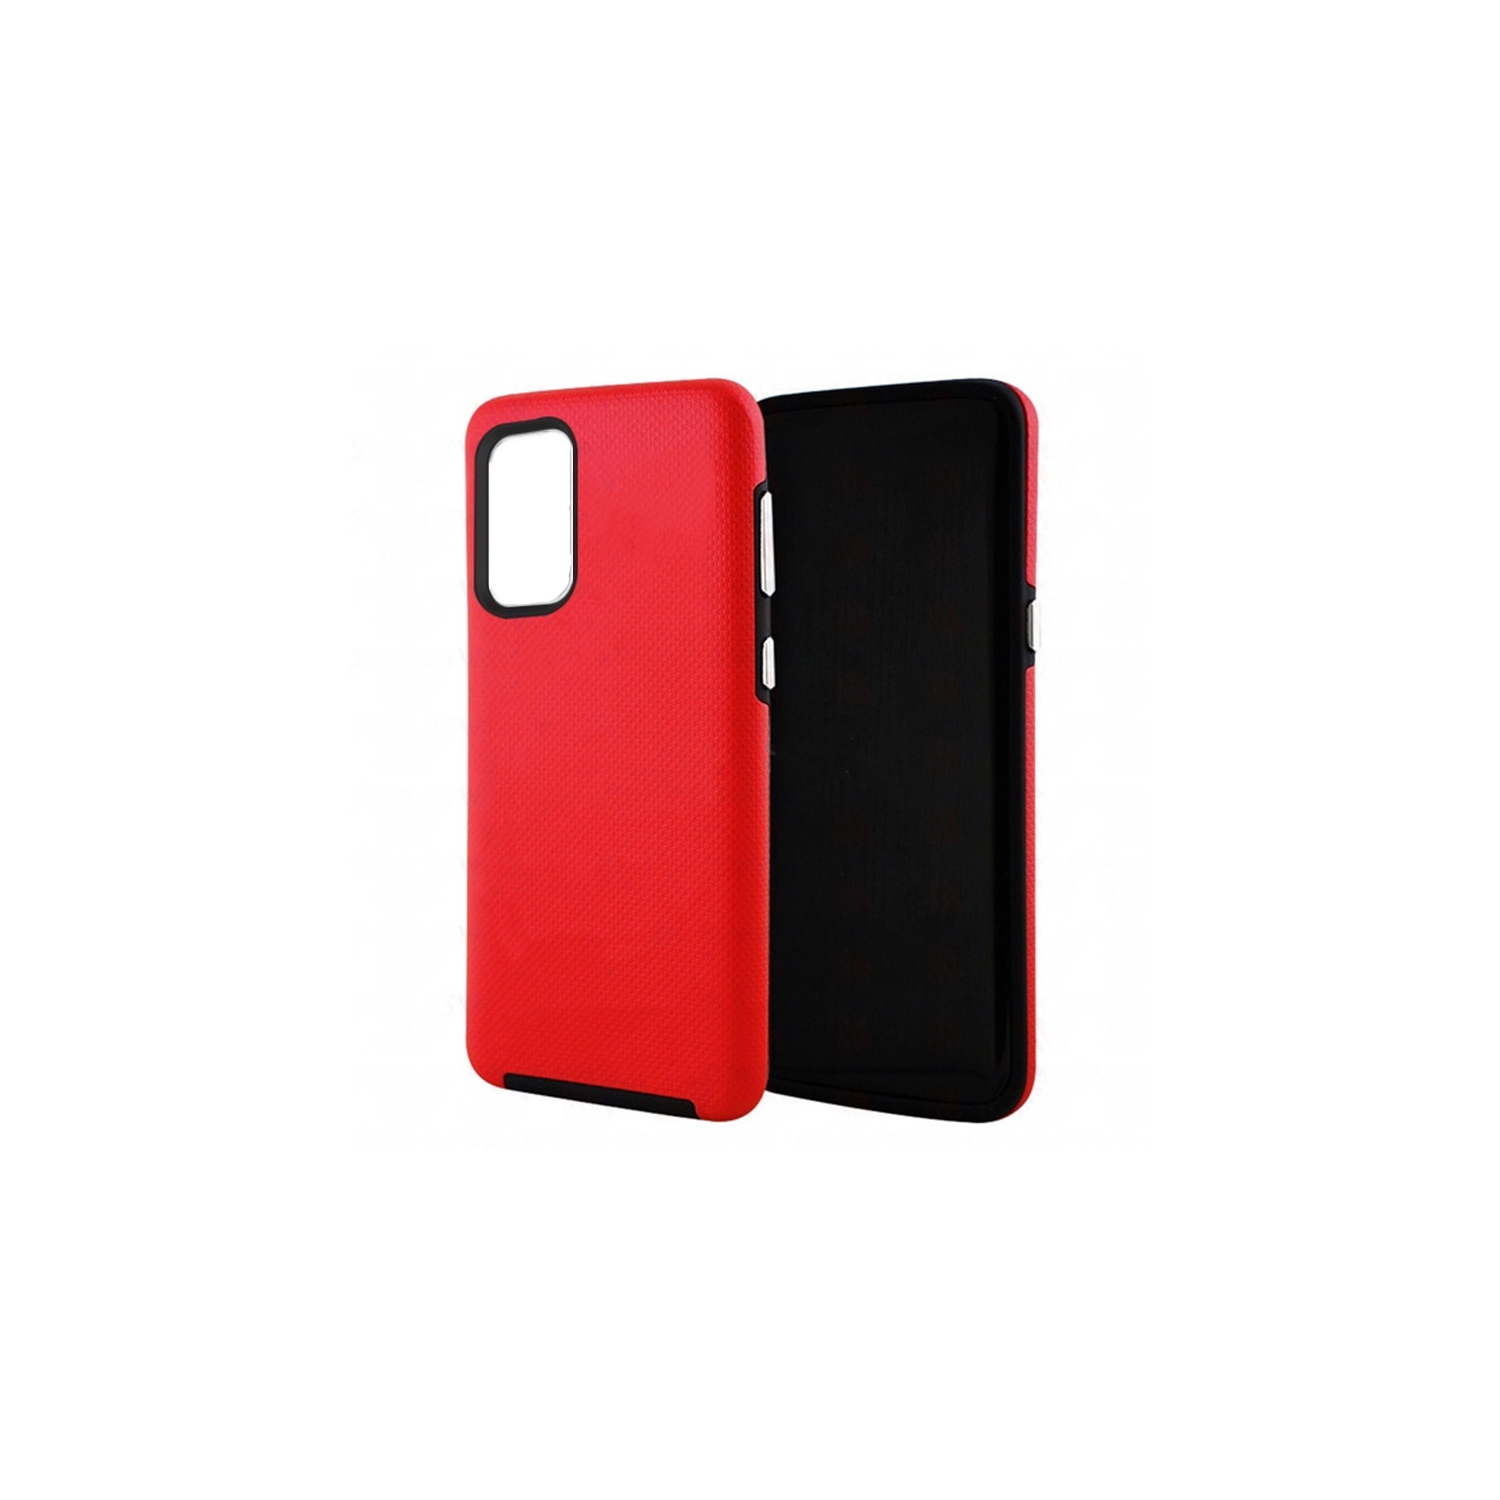 【CSmart】 Slim Fitted Hybrid Hard PC Shell Shockproof Scratch Resistant Case Cover for Samsung Galaxy A32 5G, Red